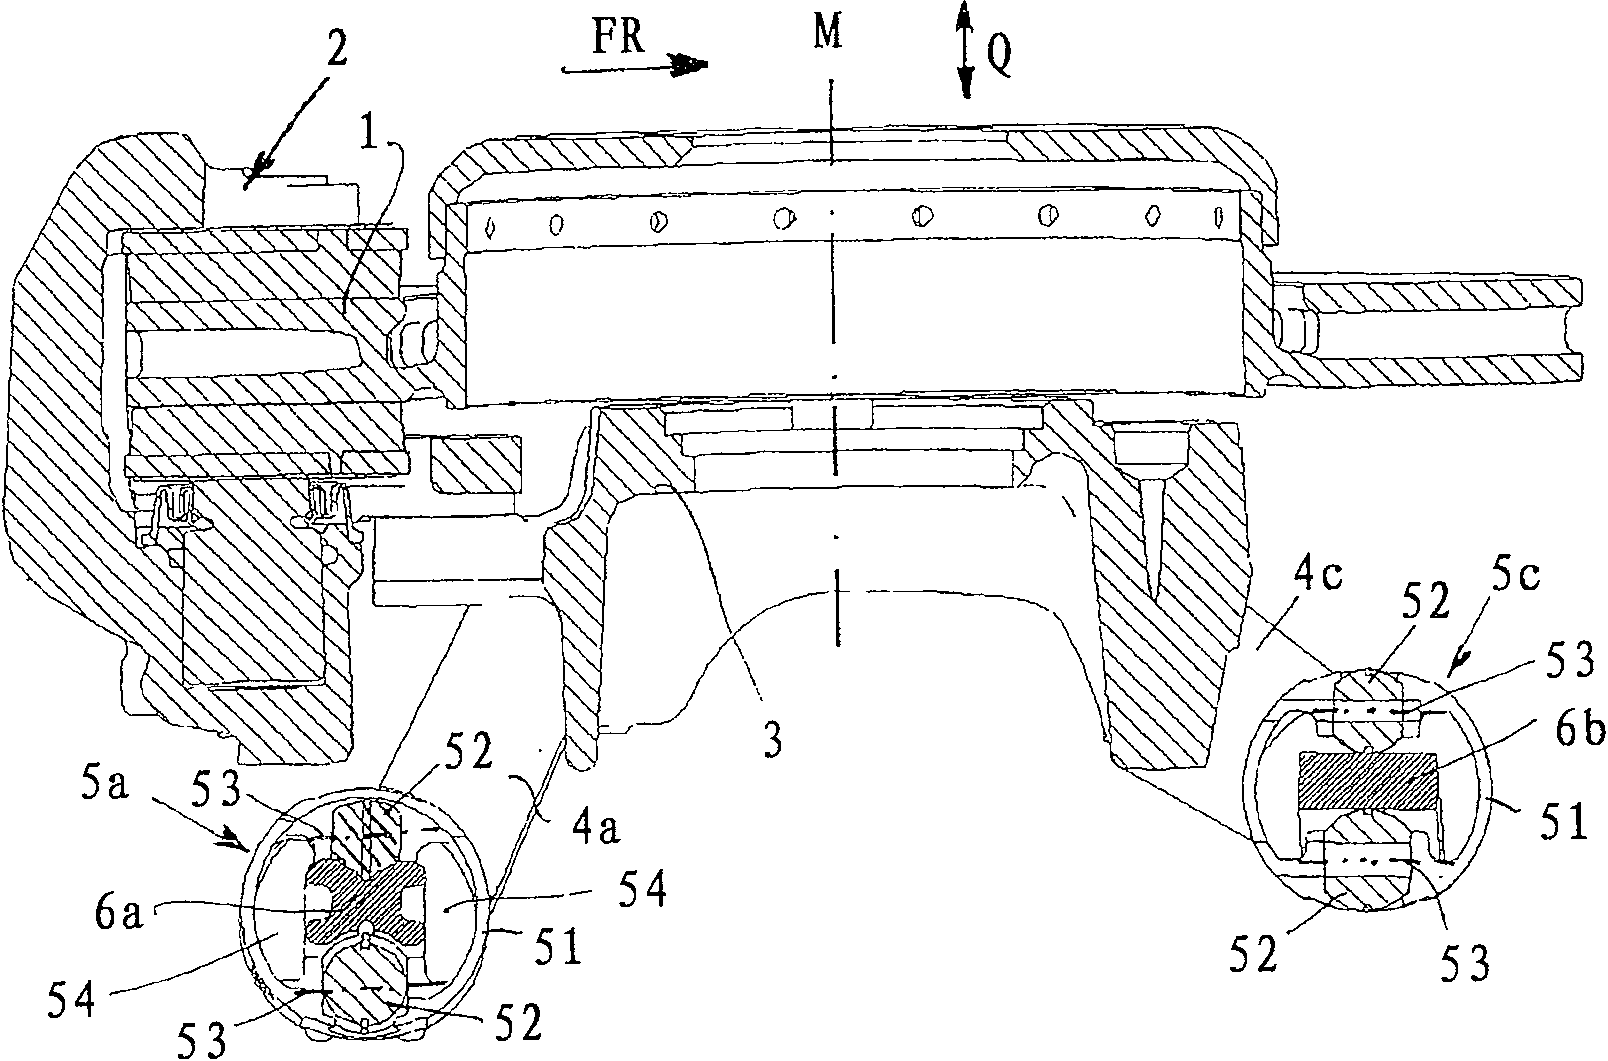 Independent wheel suspension of a two-track vehicle